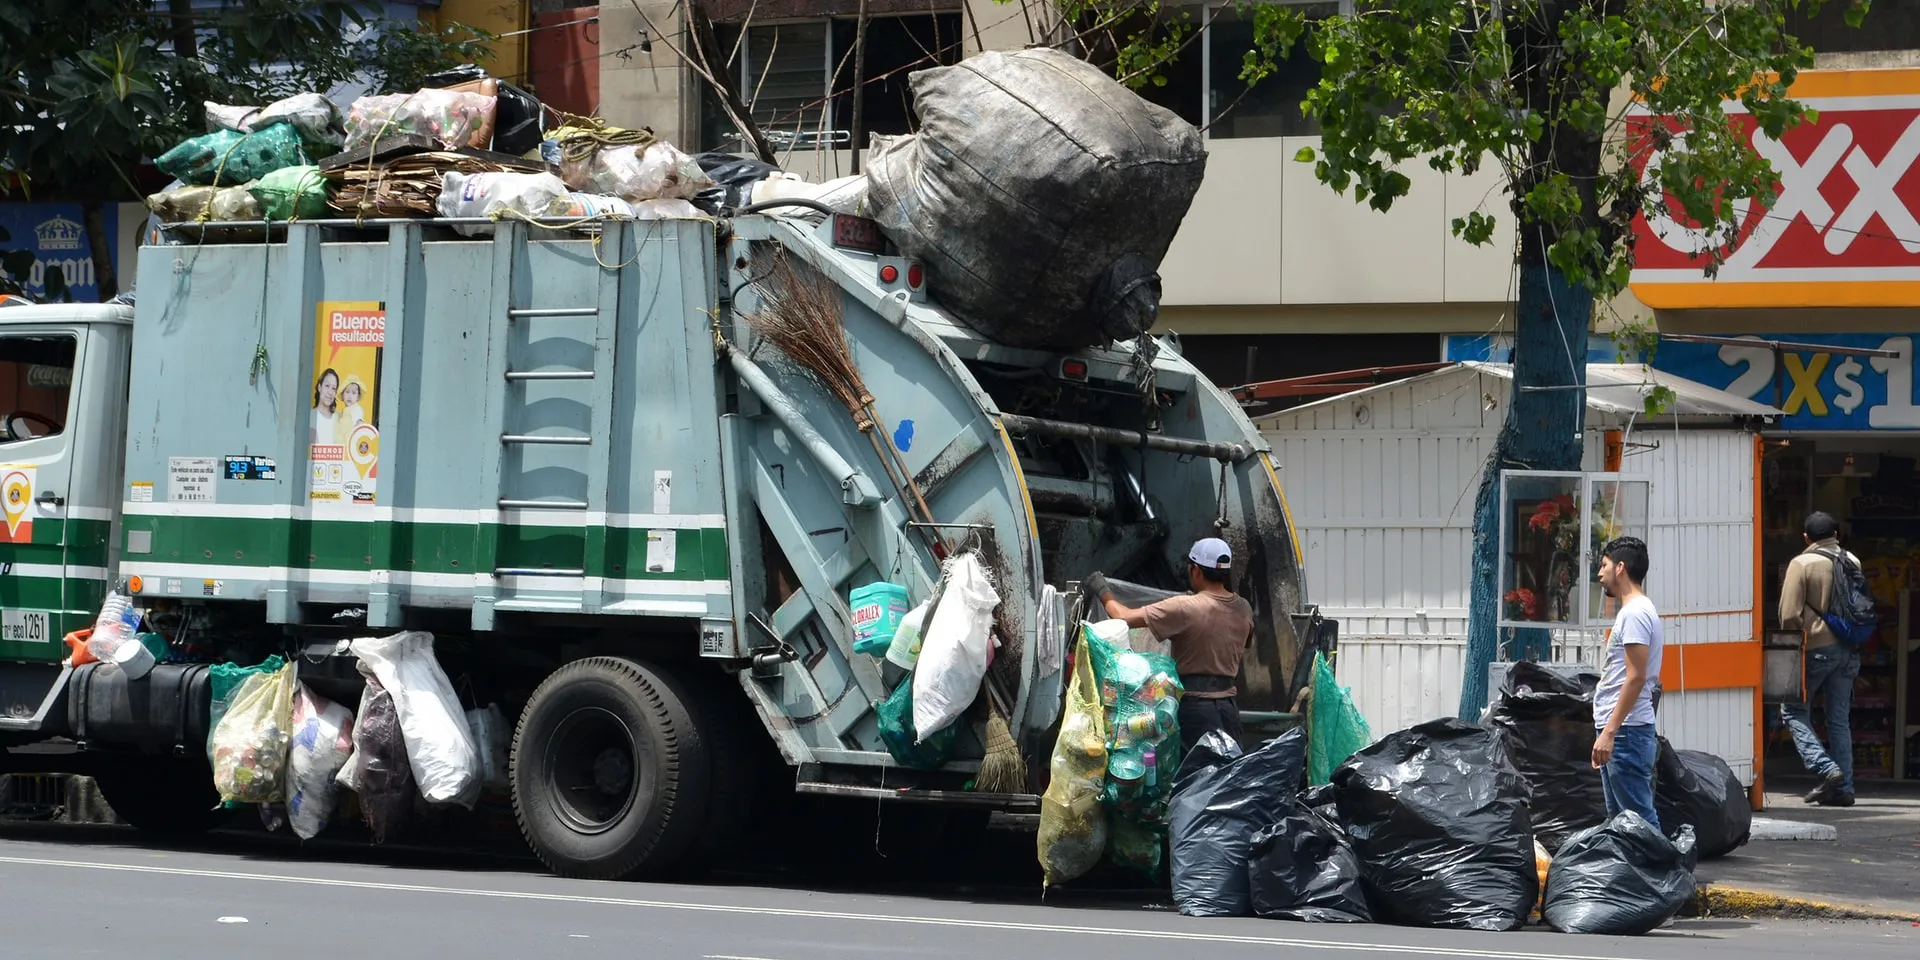 Garbage trucks are not allowed to leak wastes down the street